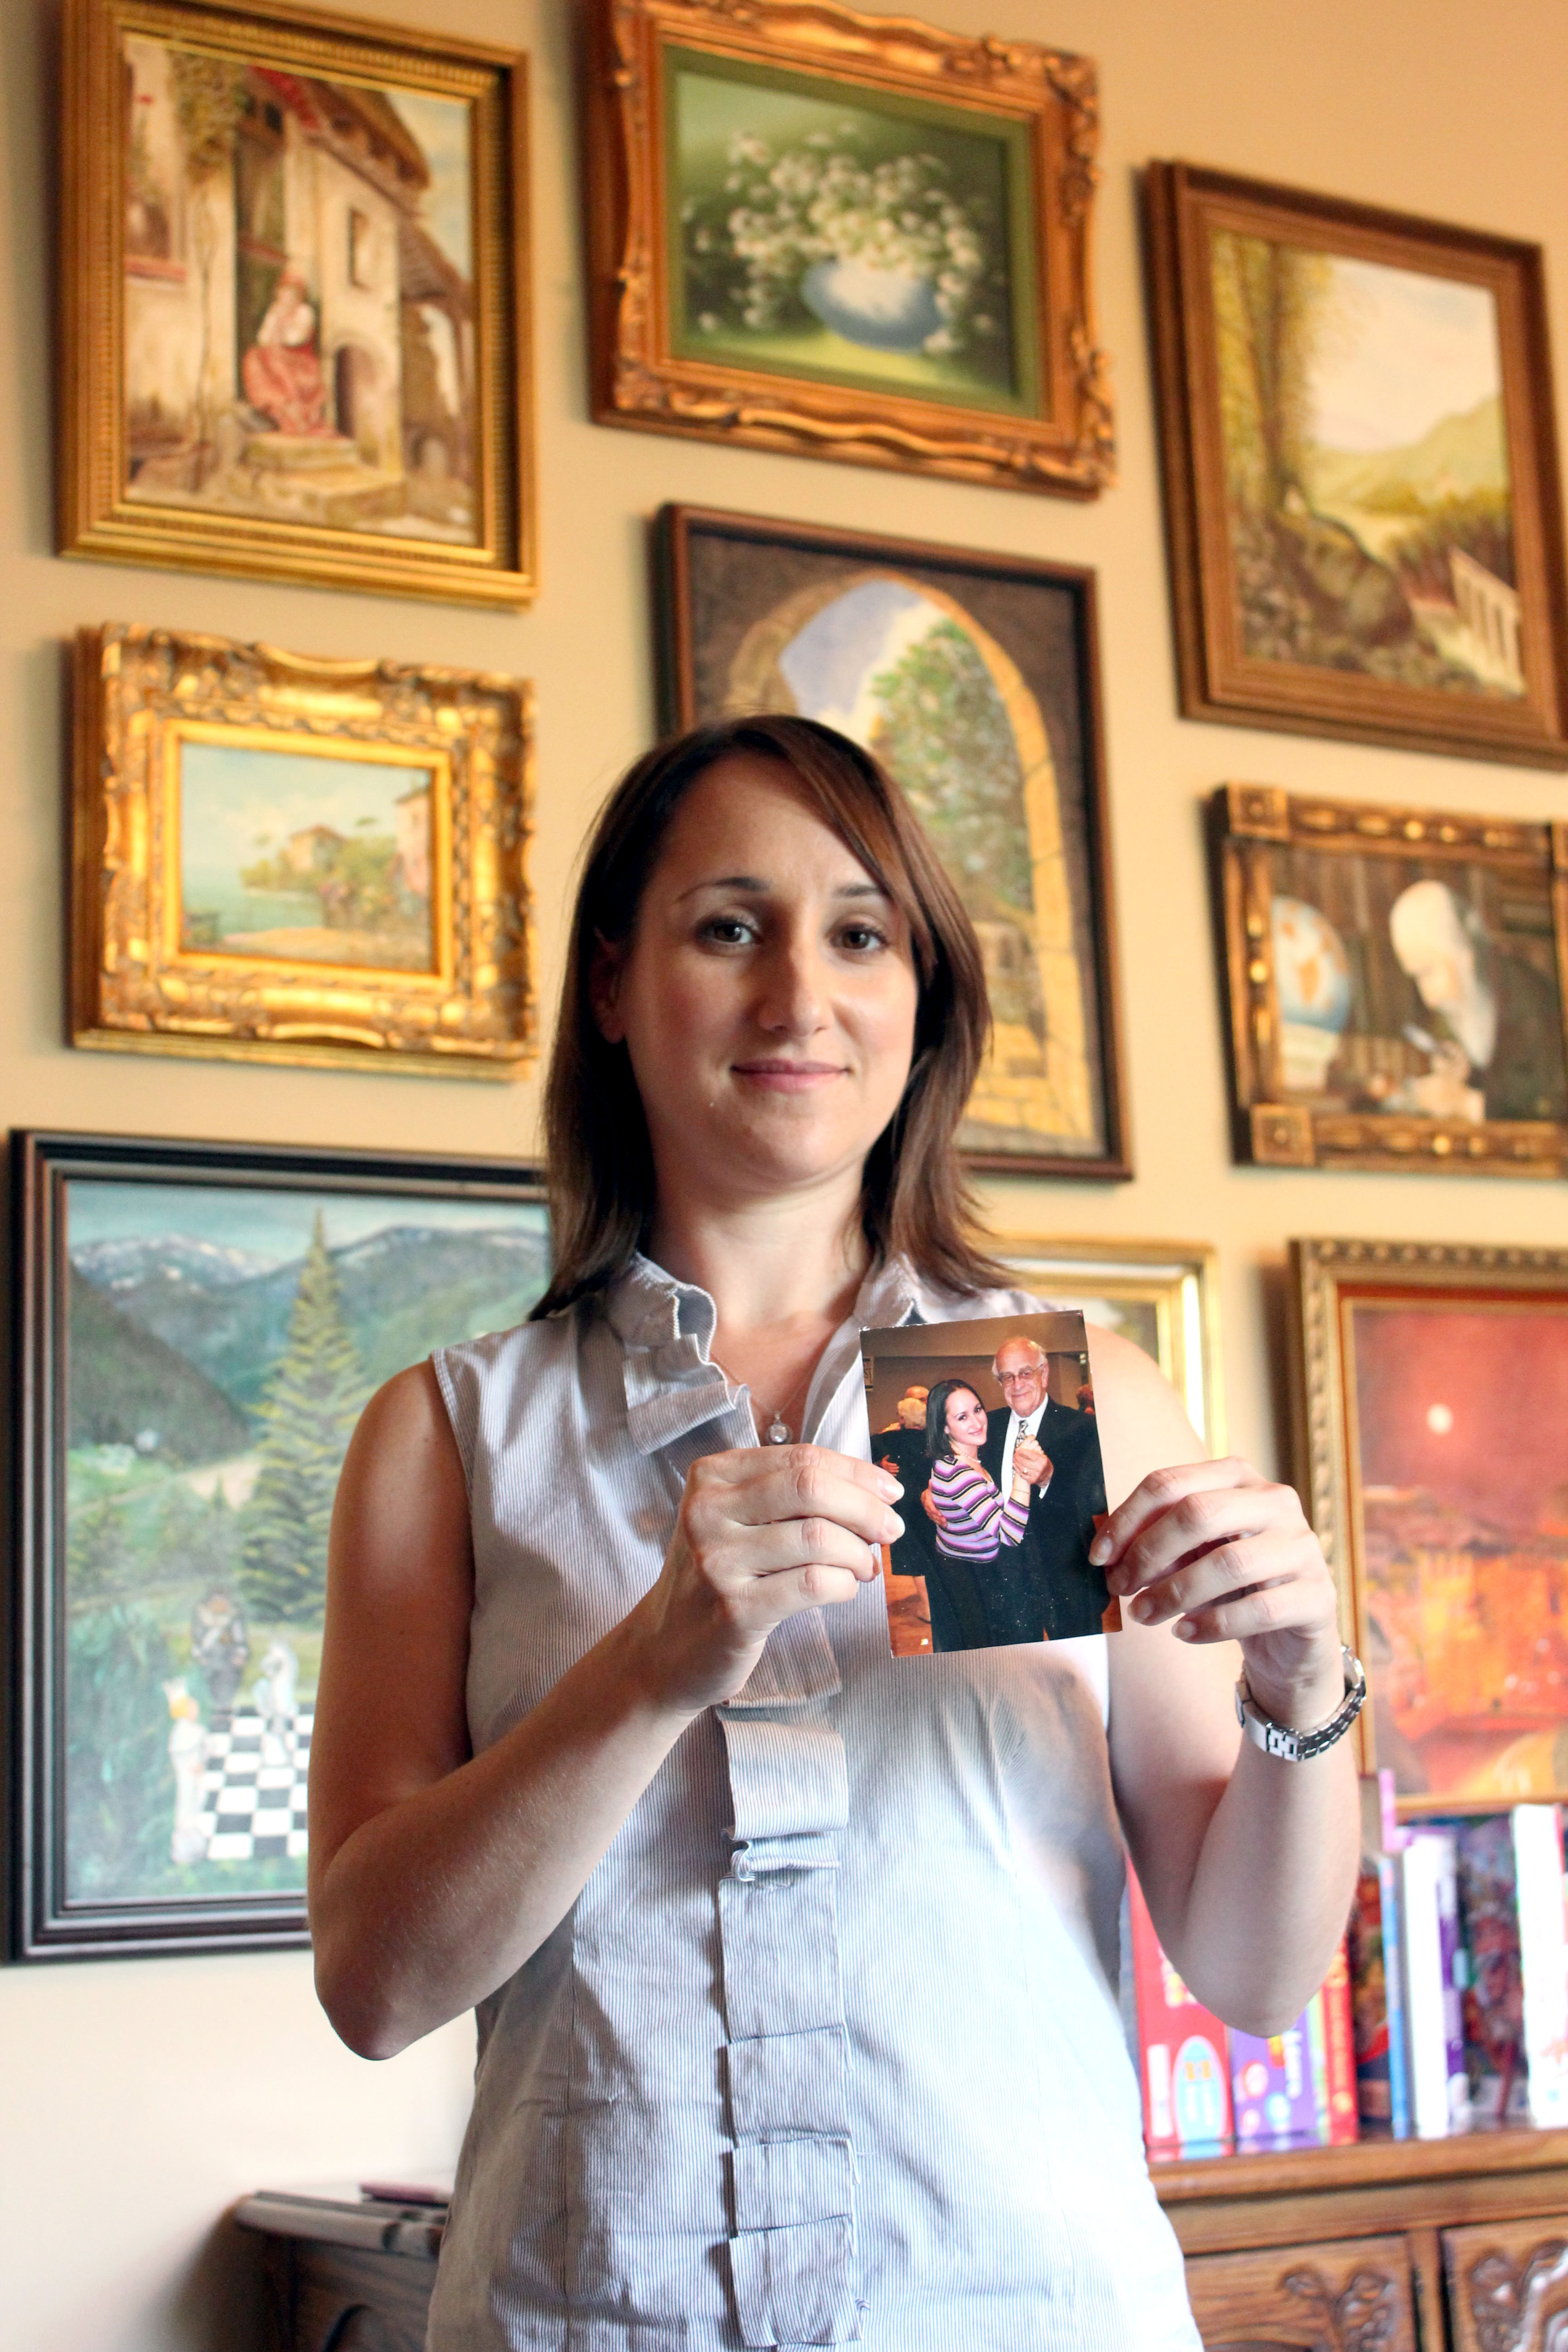 Julie Kronenberg holds a photo of her dancing with her grandfather, Jacob Hennenberg, a Holocaust survivor during a 2001 Kol Israel dinner held in honor of him. Behind her are several of her grandfather’s paintings, and the Beachwood house in which she now lives was once her grandparents’ home.